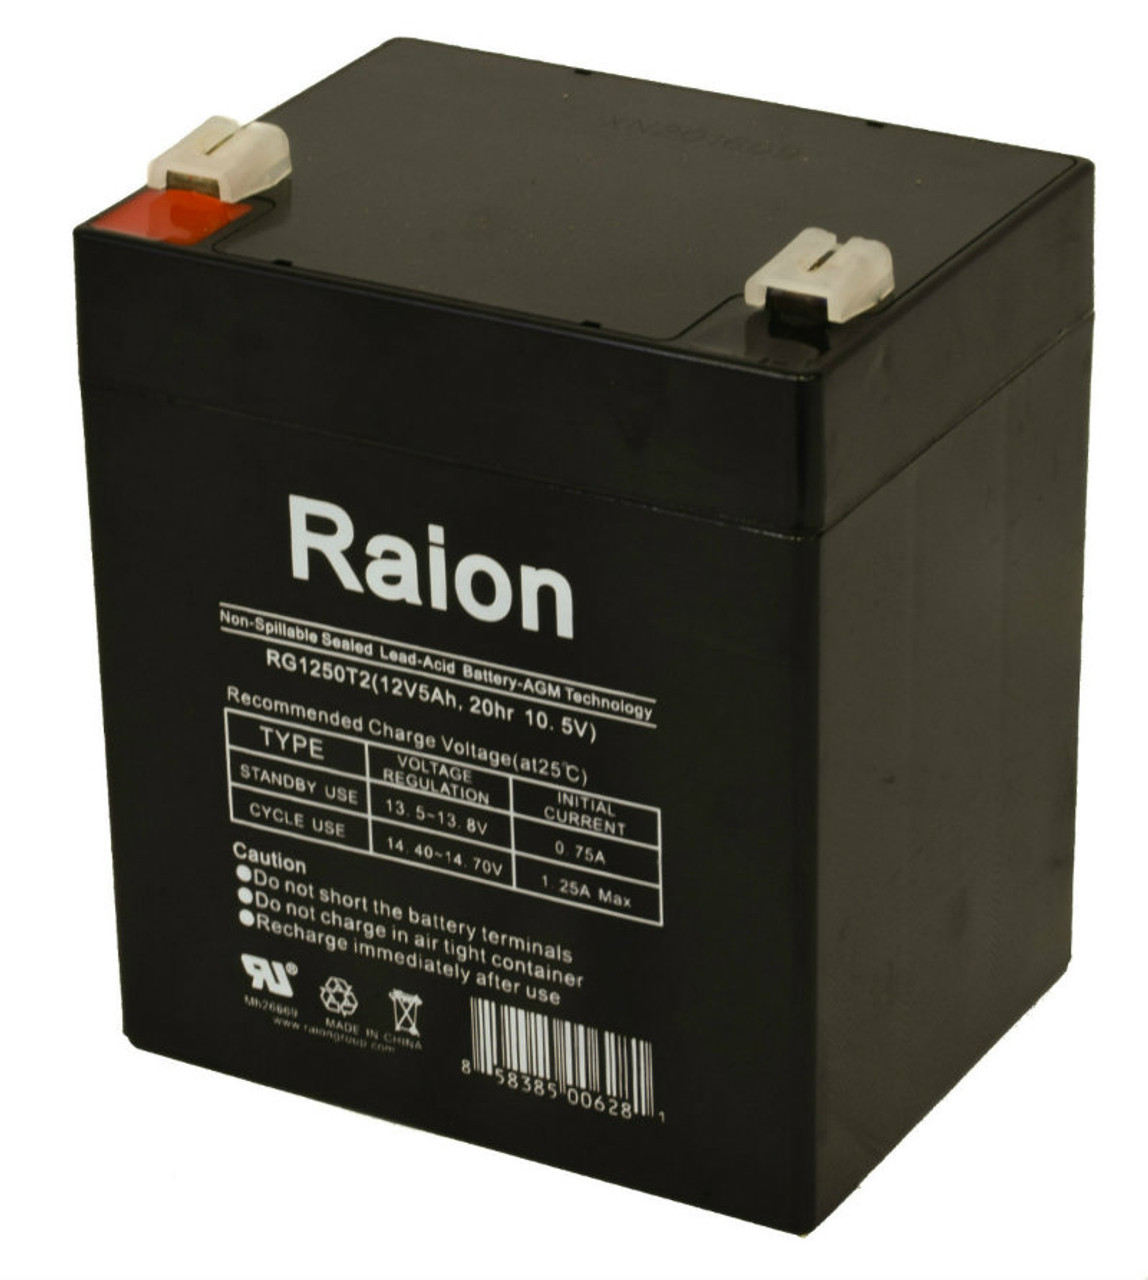 Raion Power RG1250T1 Replacement Battery for Precor AMT10 Fitness Equipment